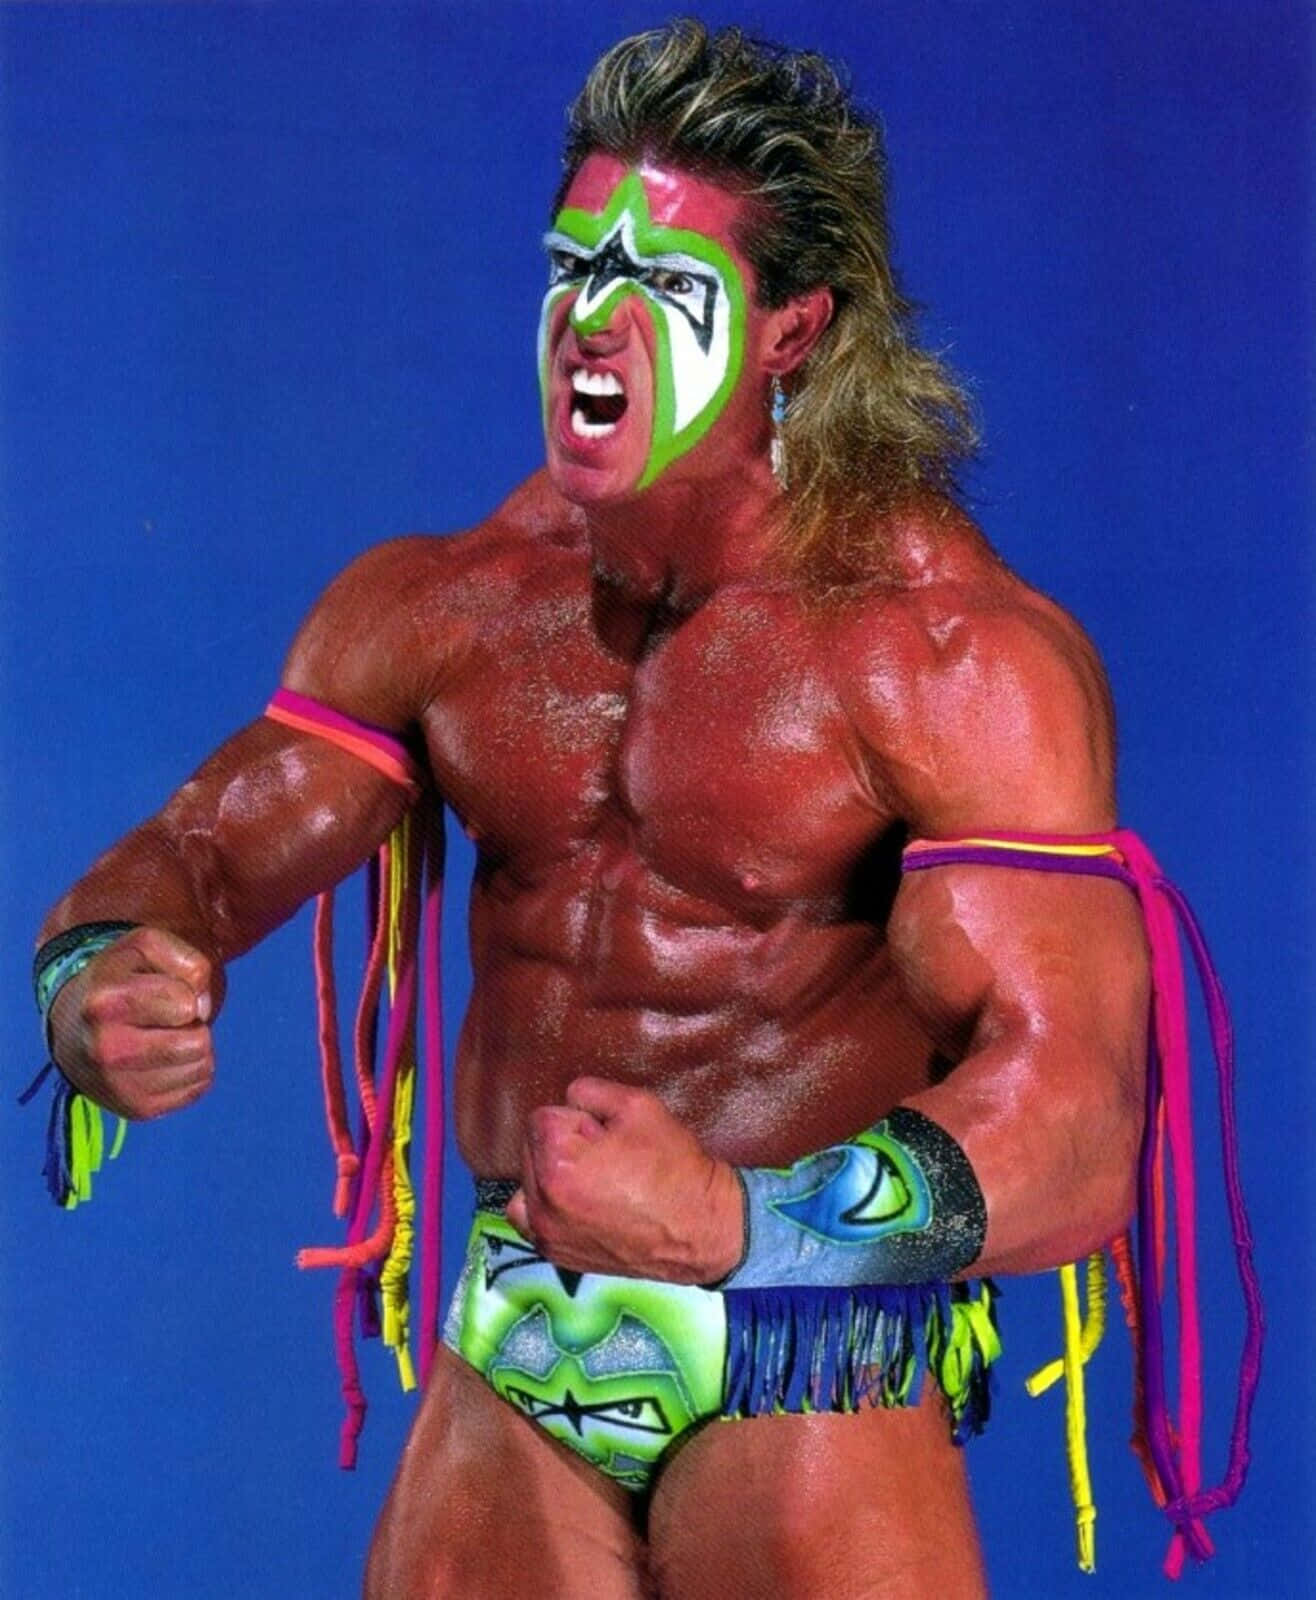 Wwe Legend - The Ultimate Warrior In His Iconic Neon Costume Background